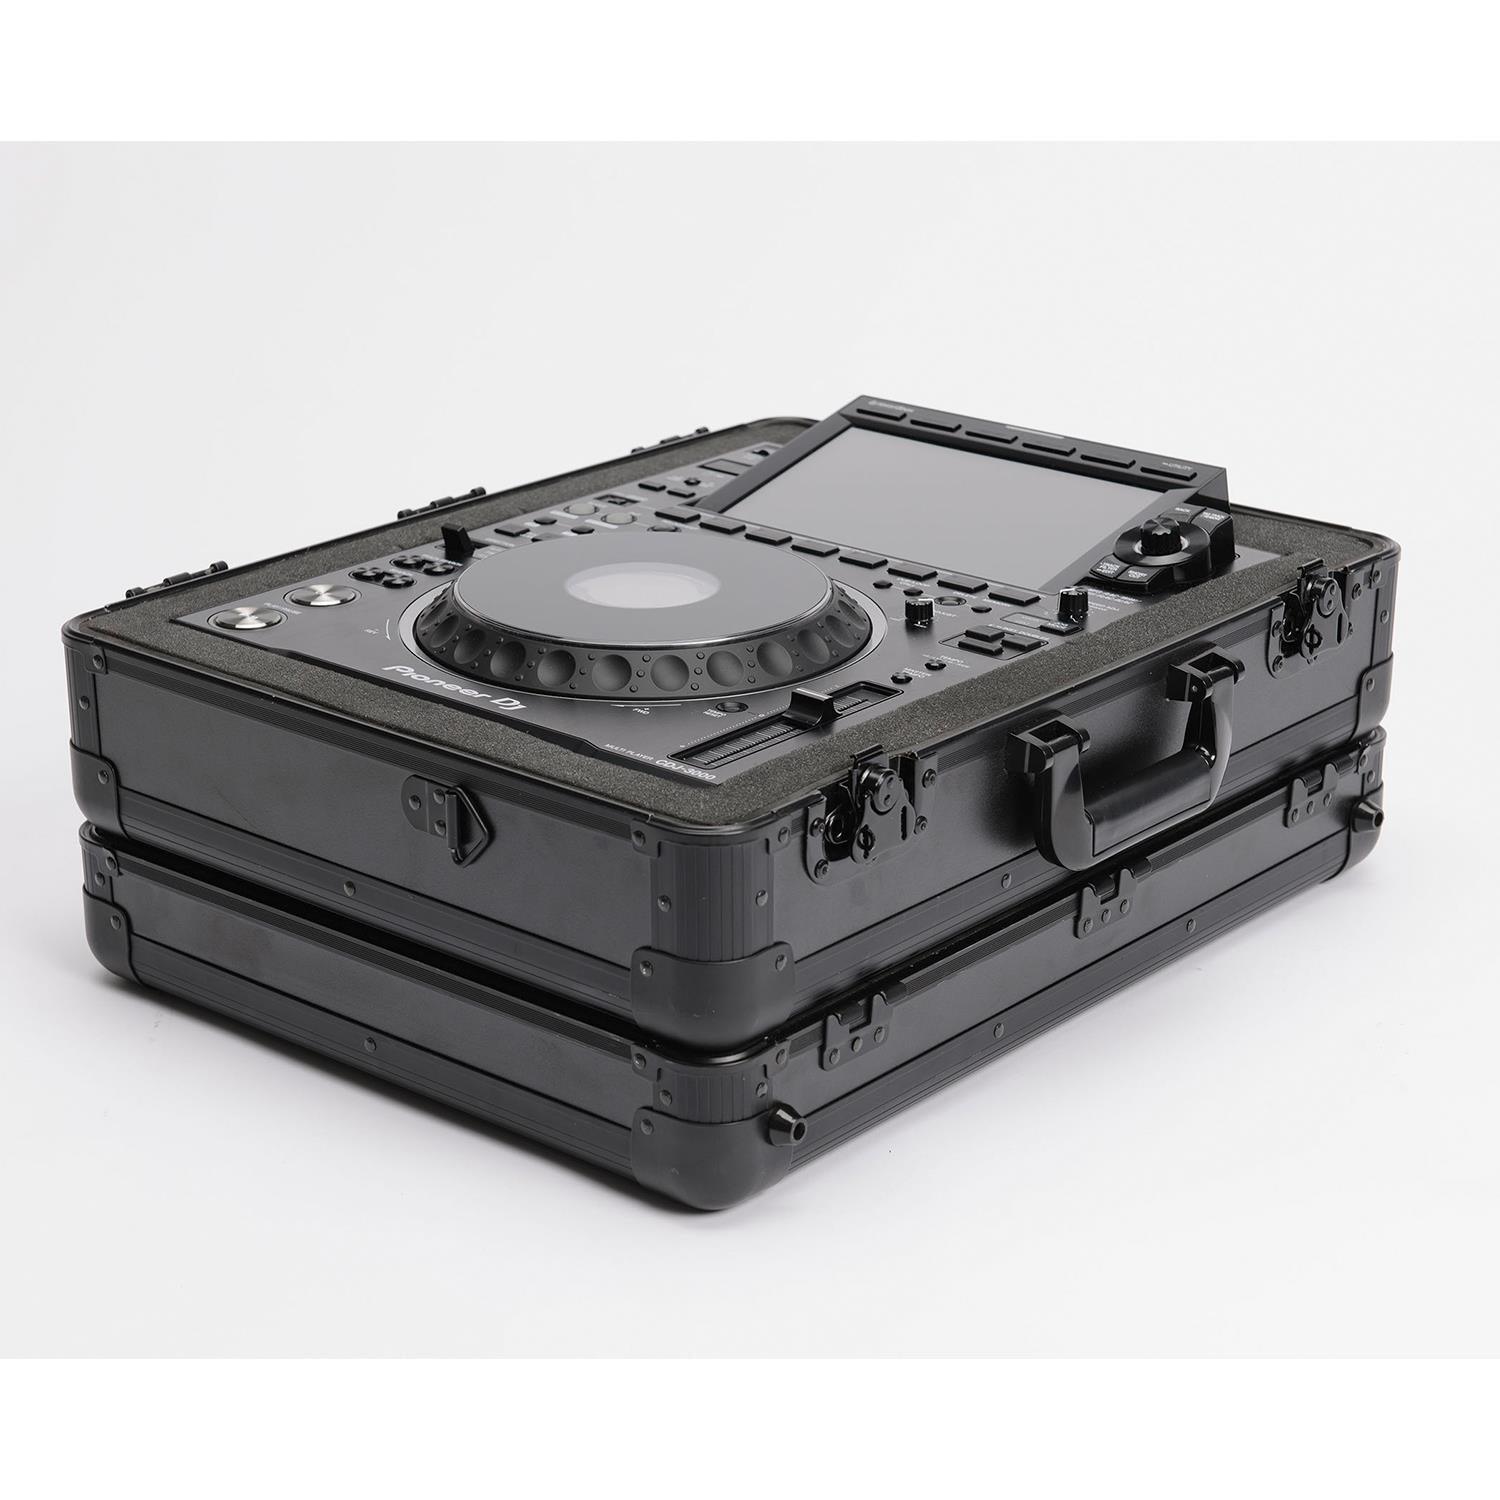 Magma CarryLite DJ-Case Player/Mixer Lightweight Carry Case - DY Pro Audio